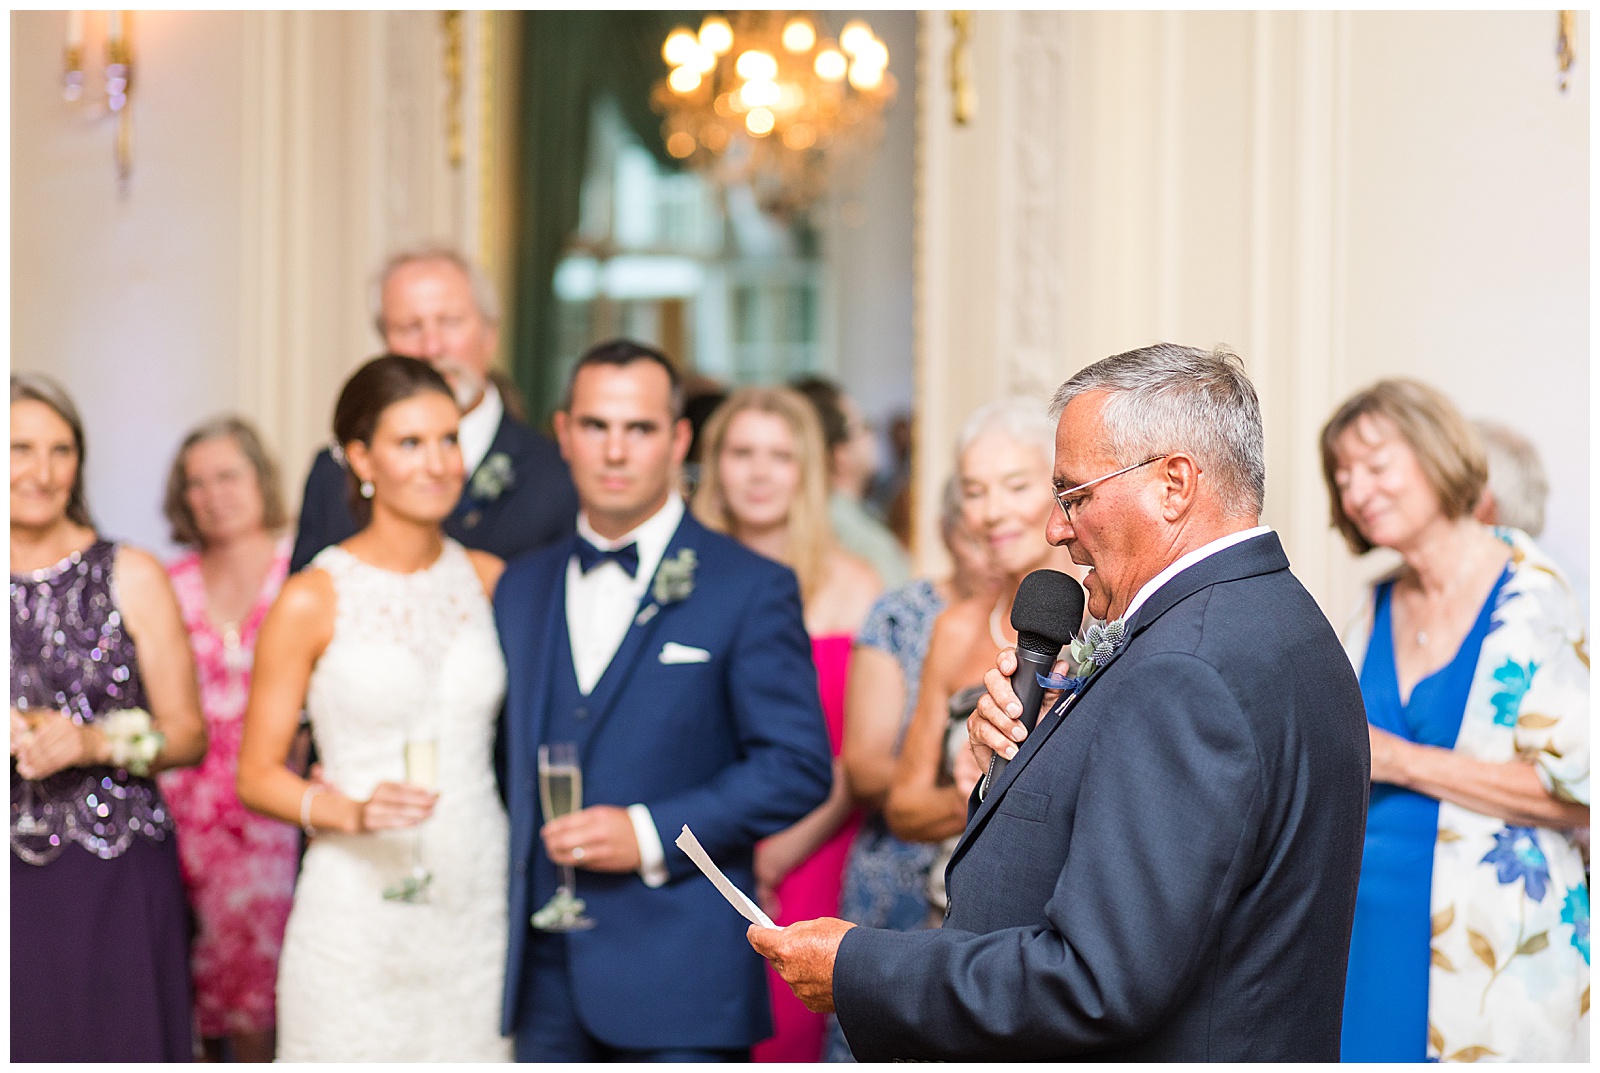 Toasts by the Father of the Groom at a Glen Manor Wedding 